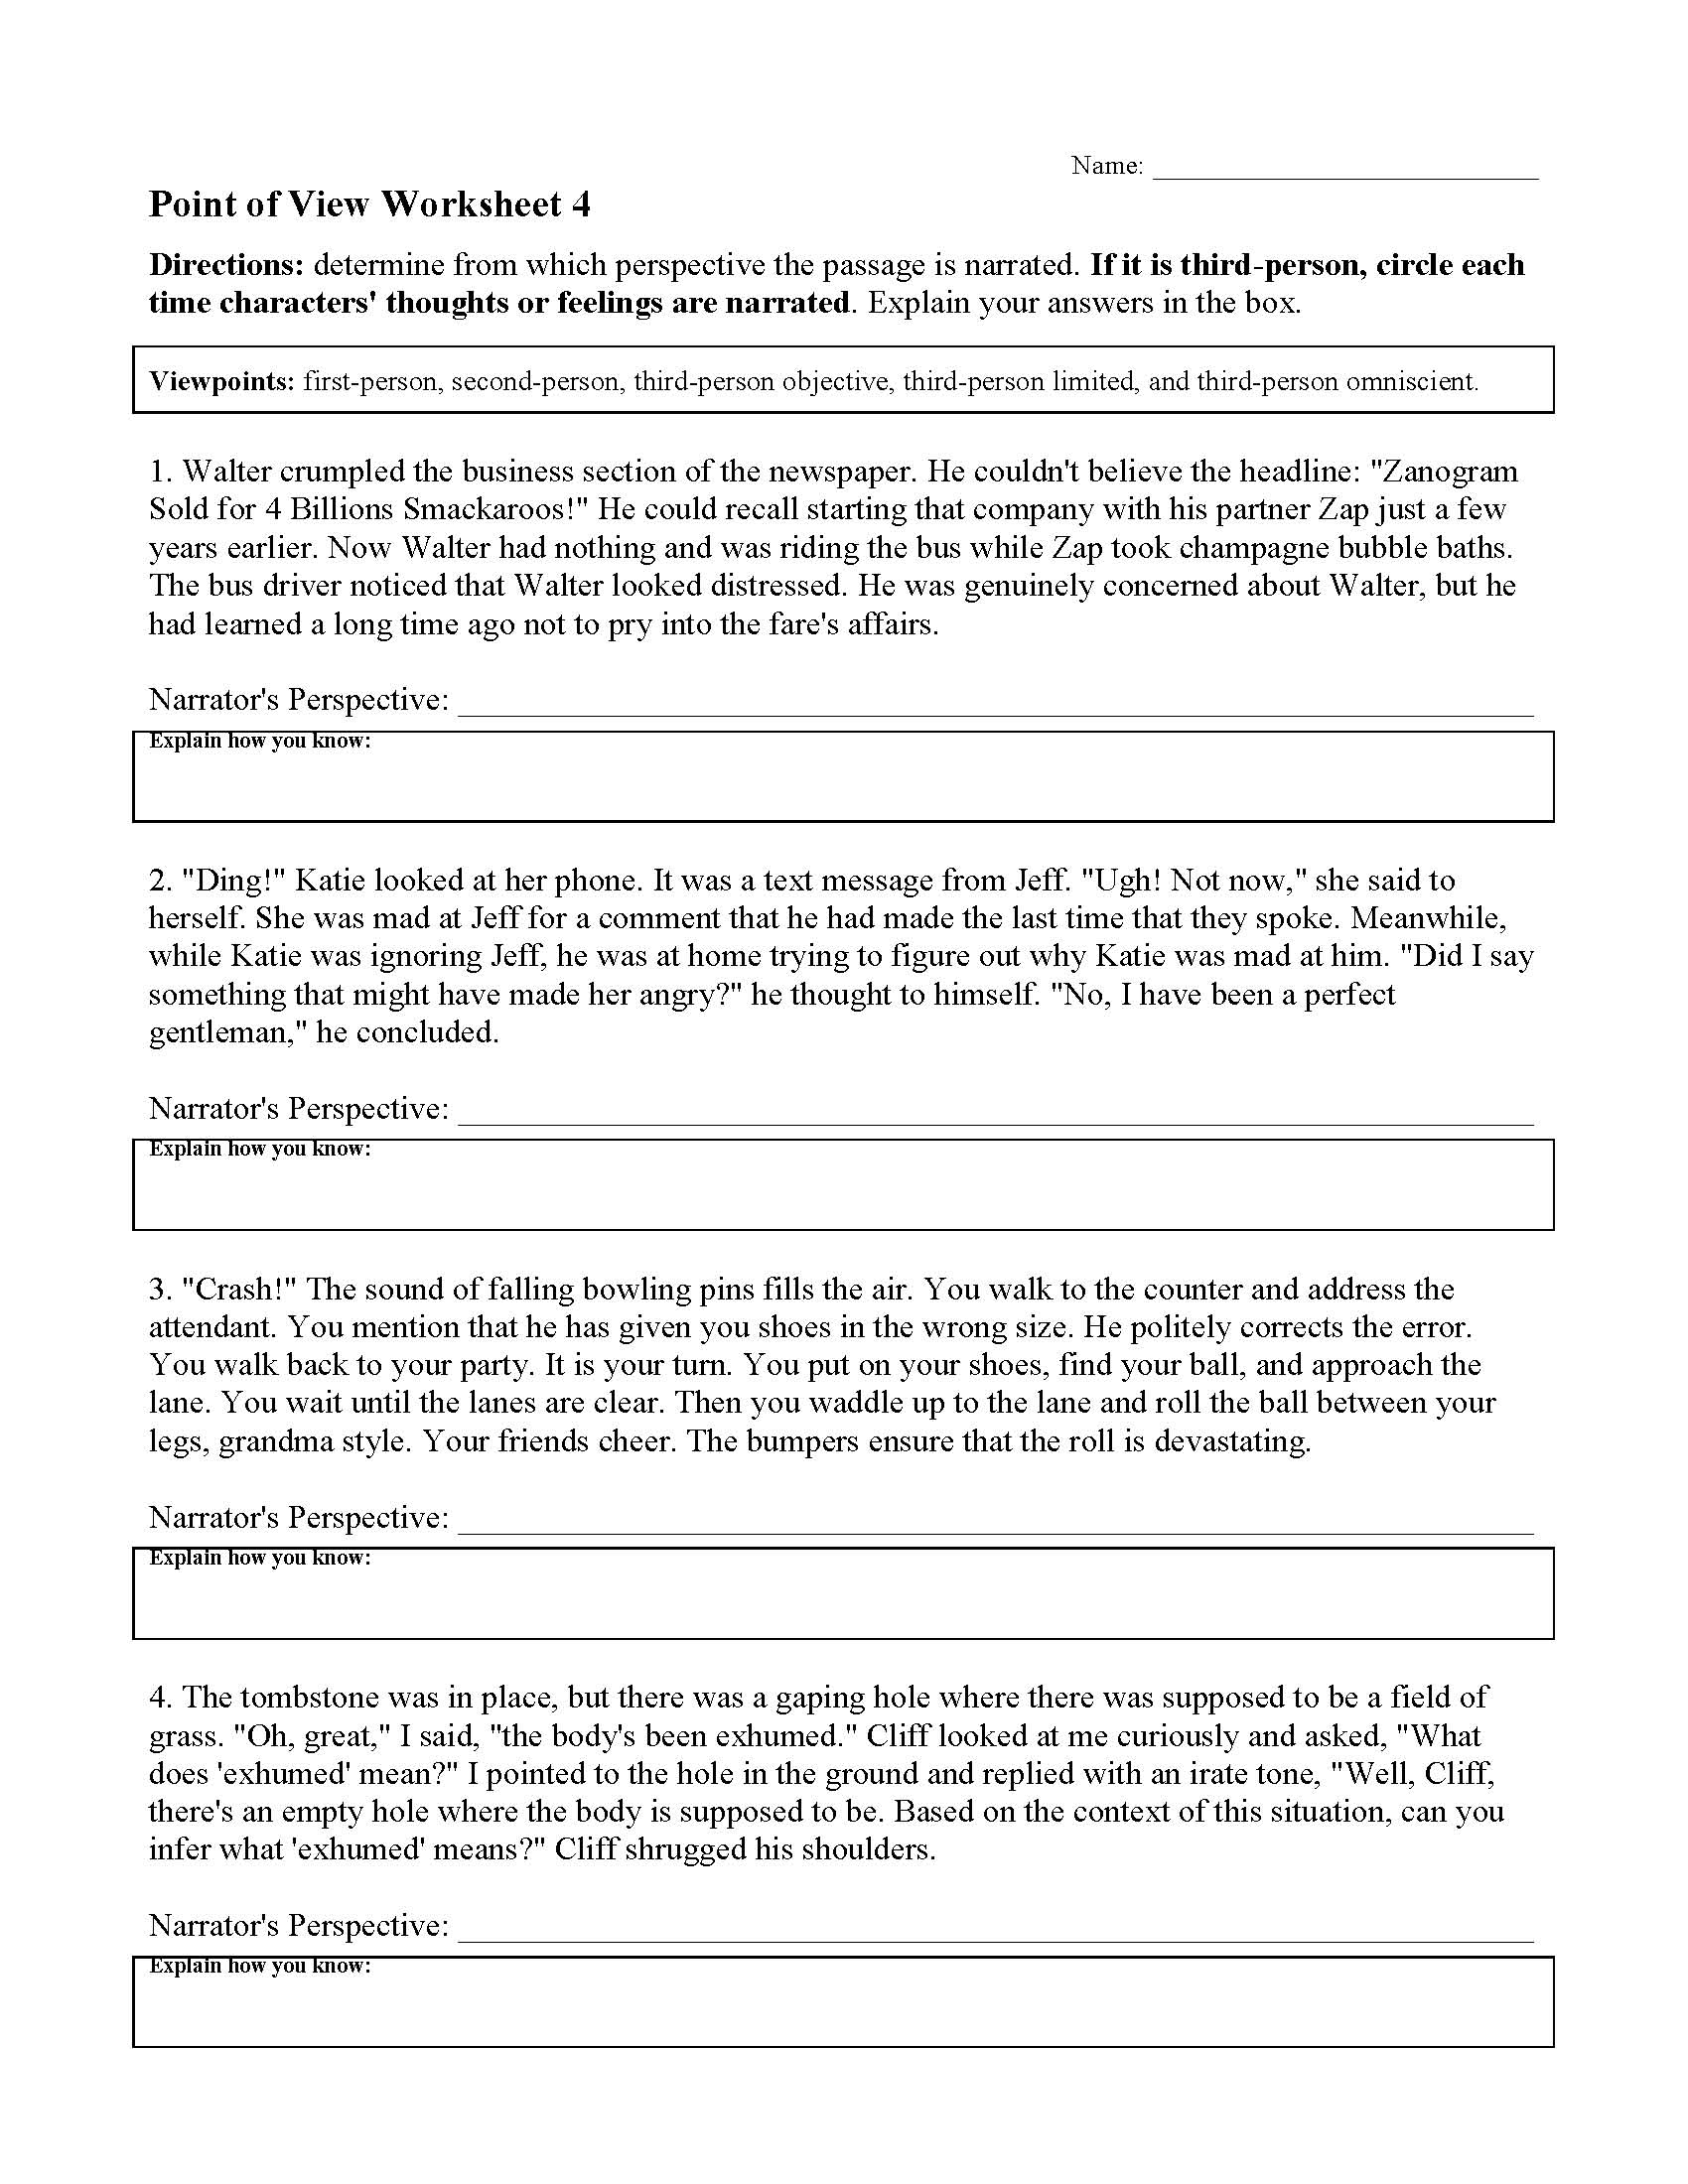 This is a preview image of the Point of View Worksheet 4.